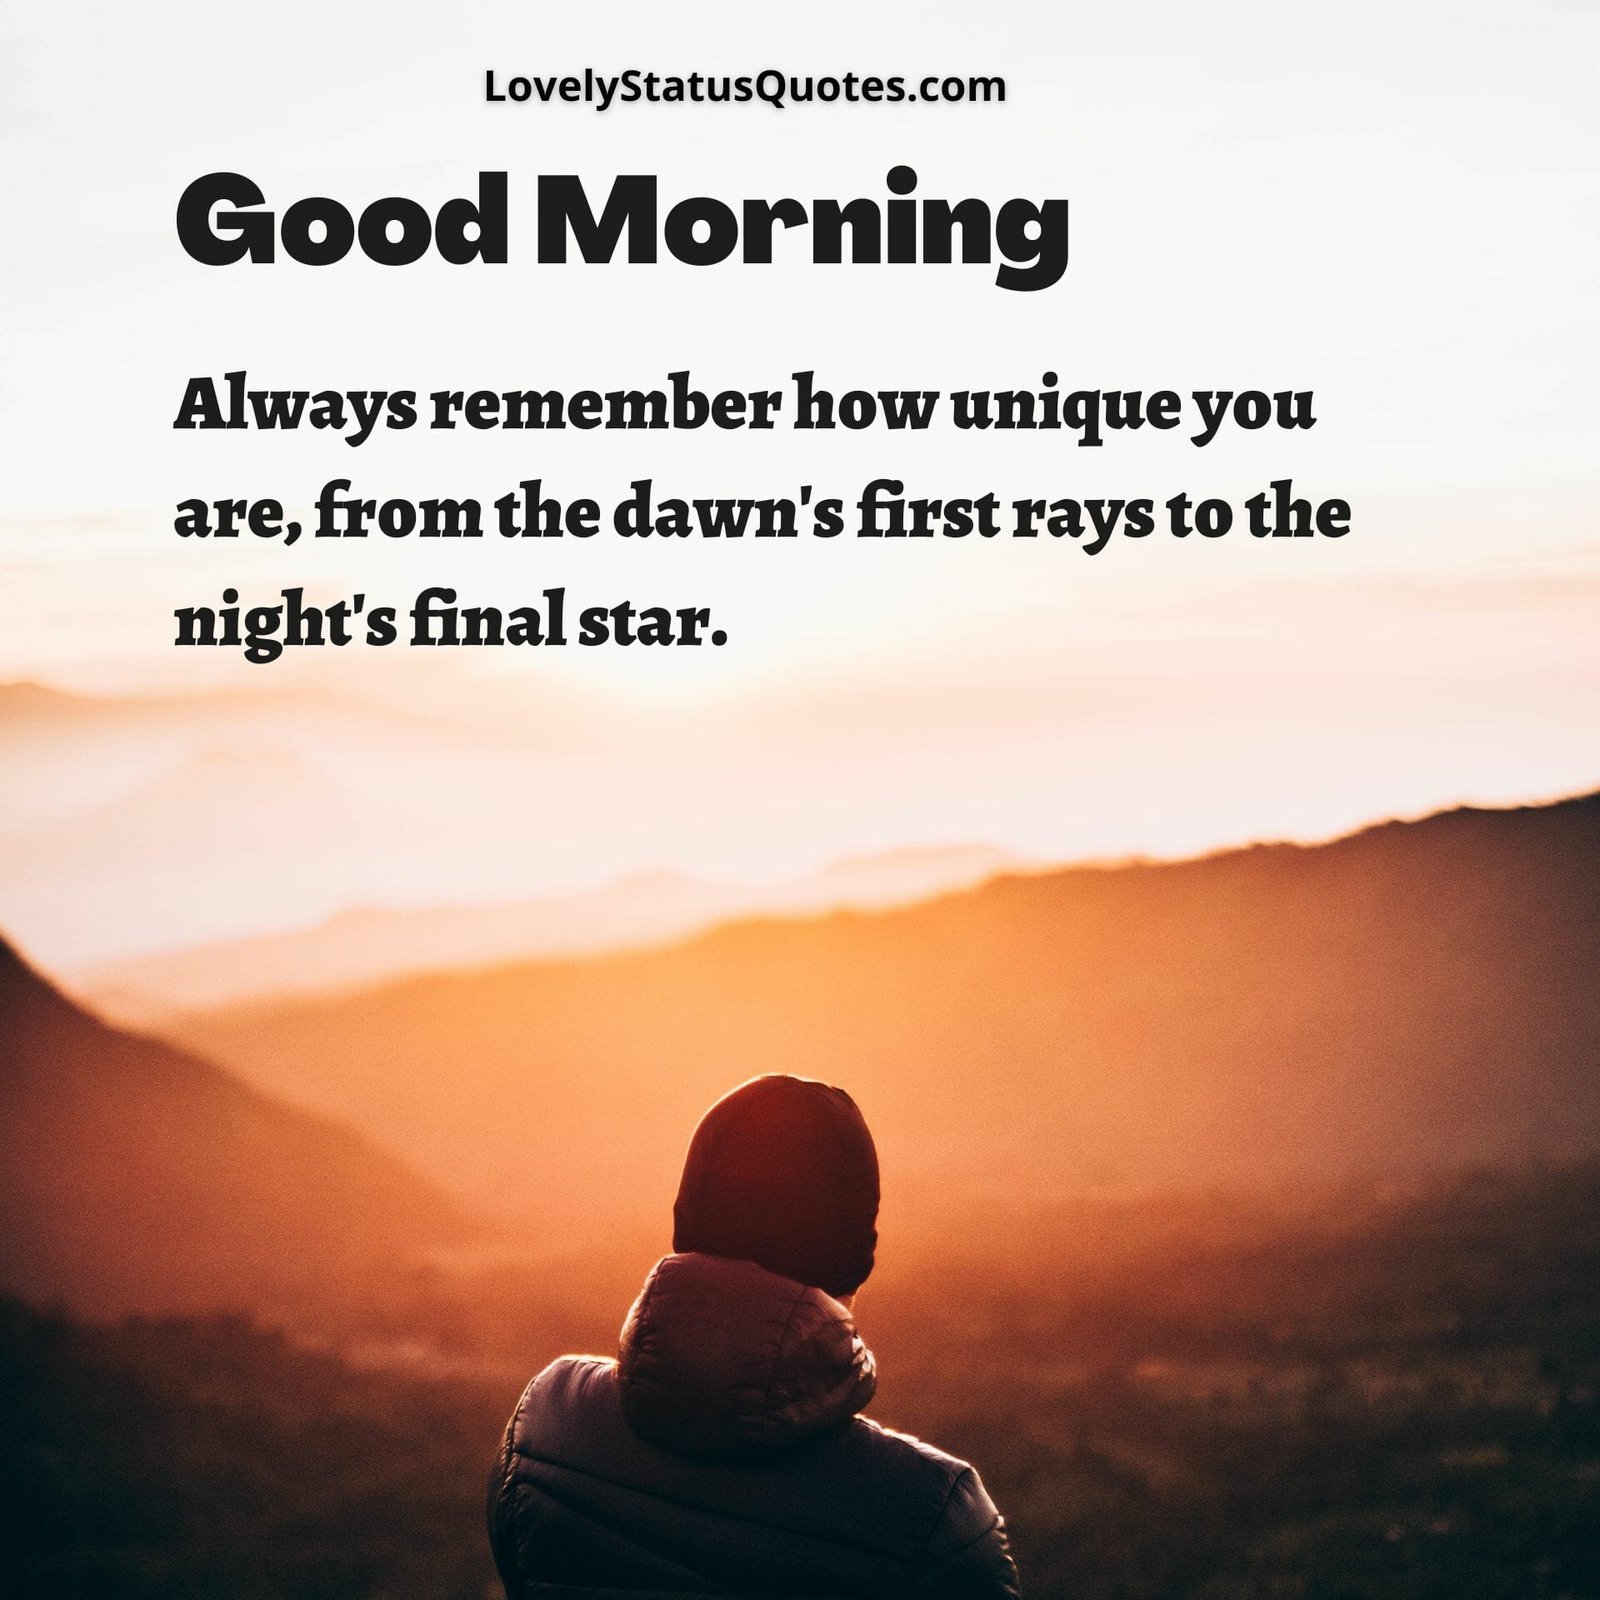 latest good morning messages with images for whatsapp